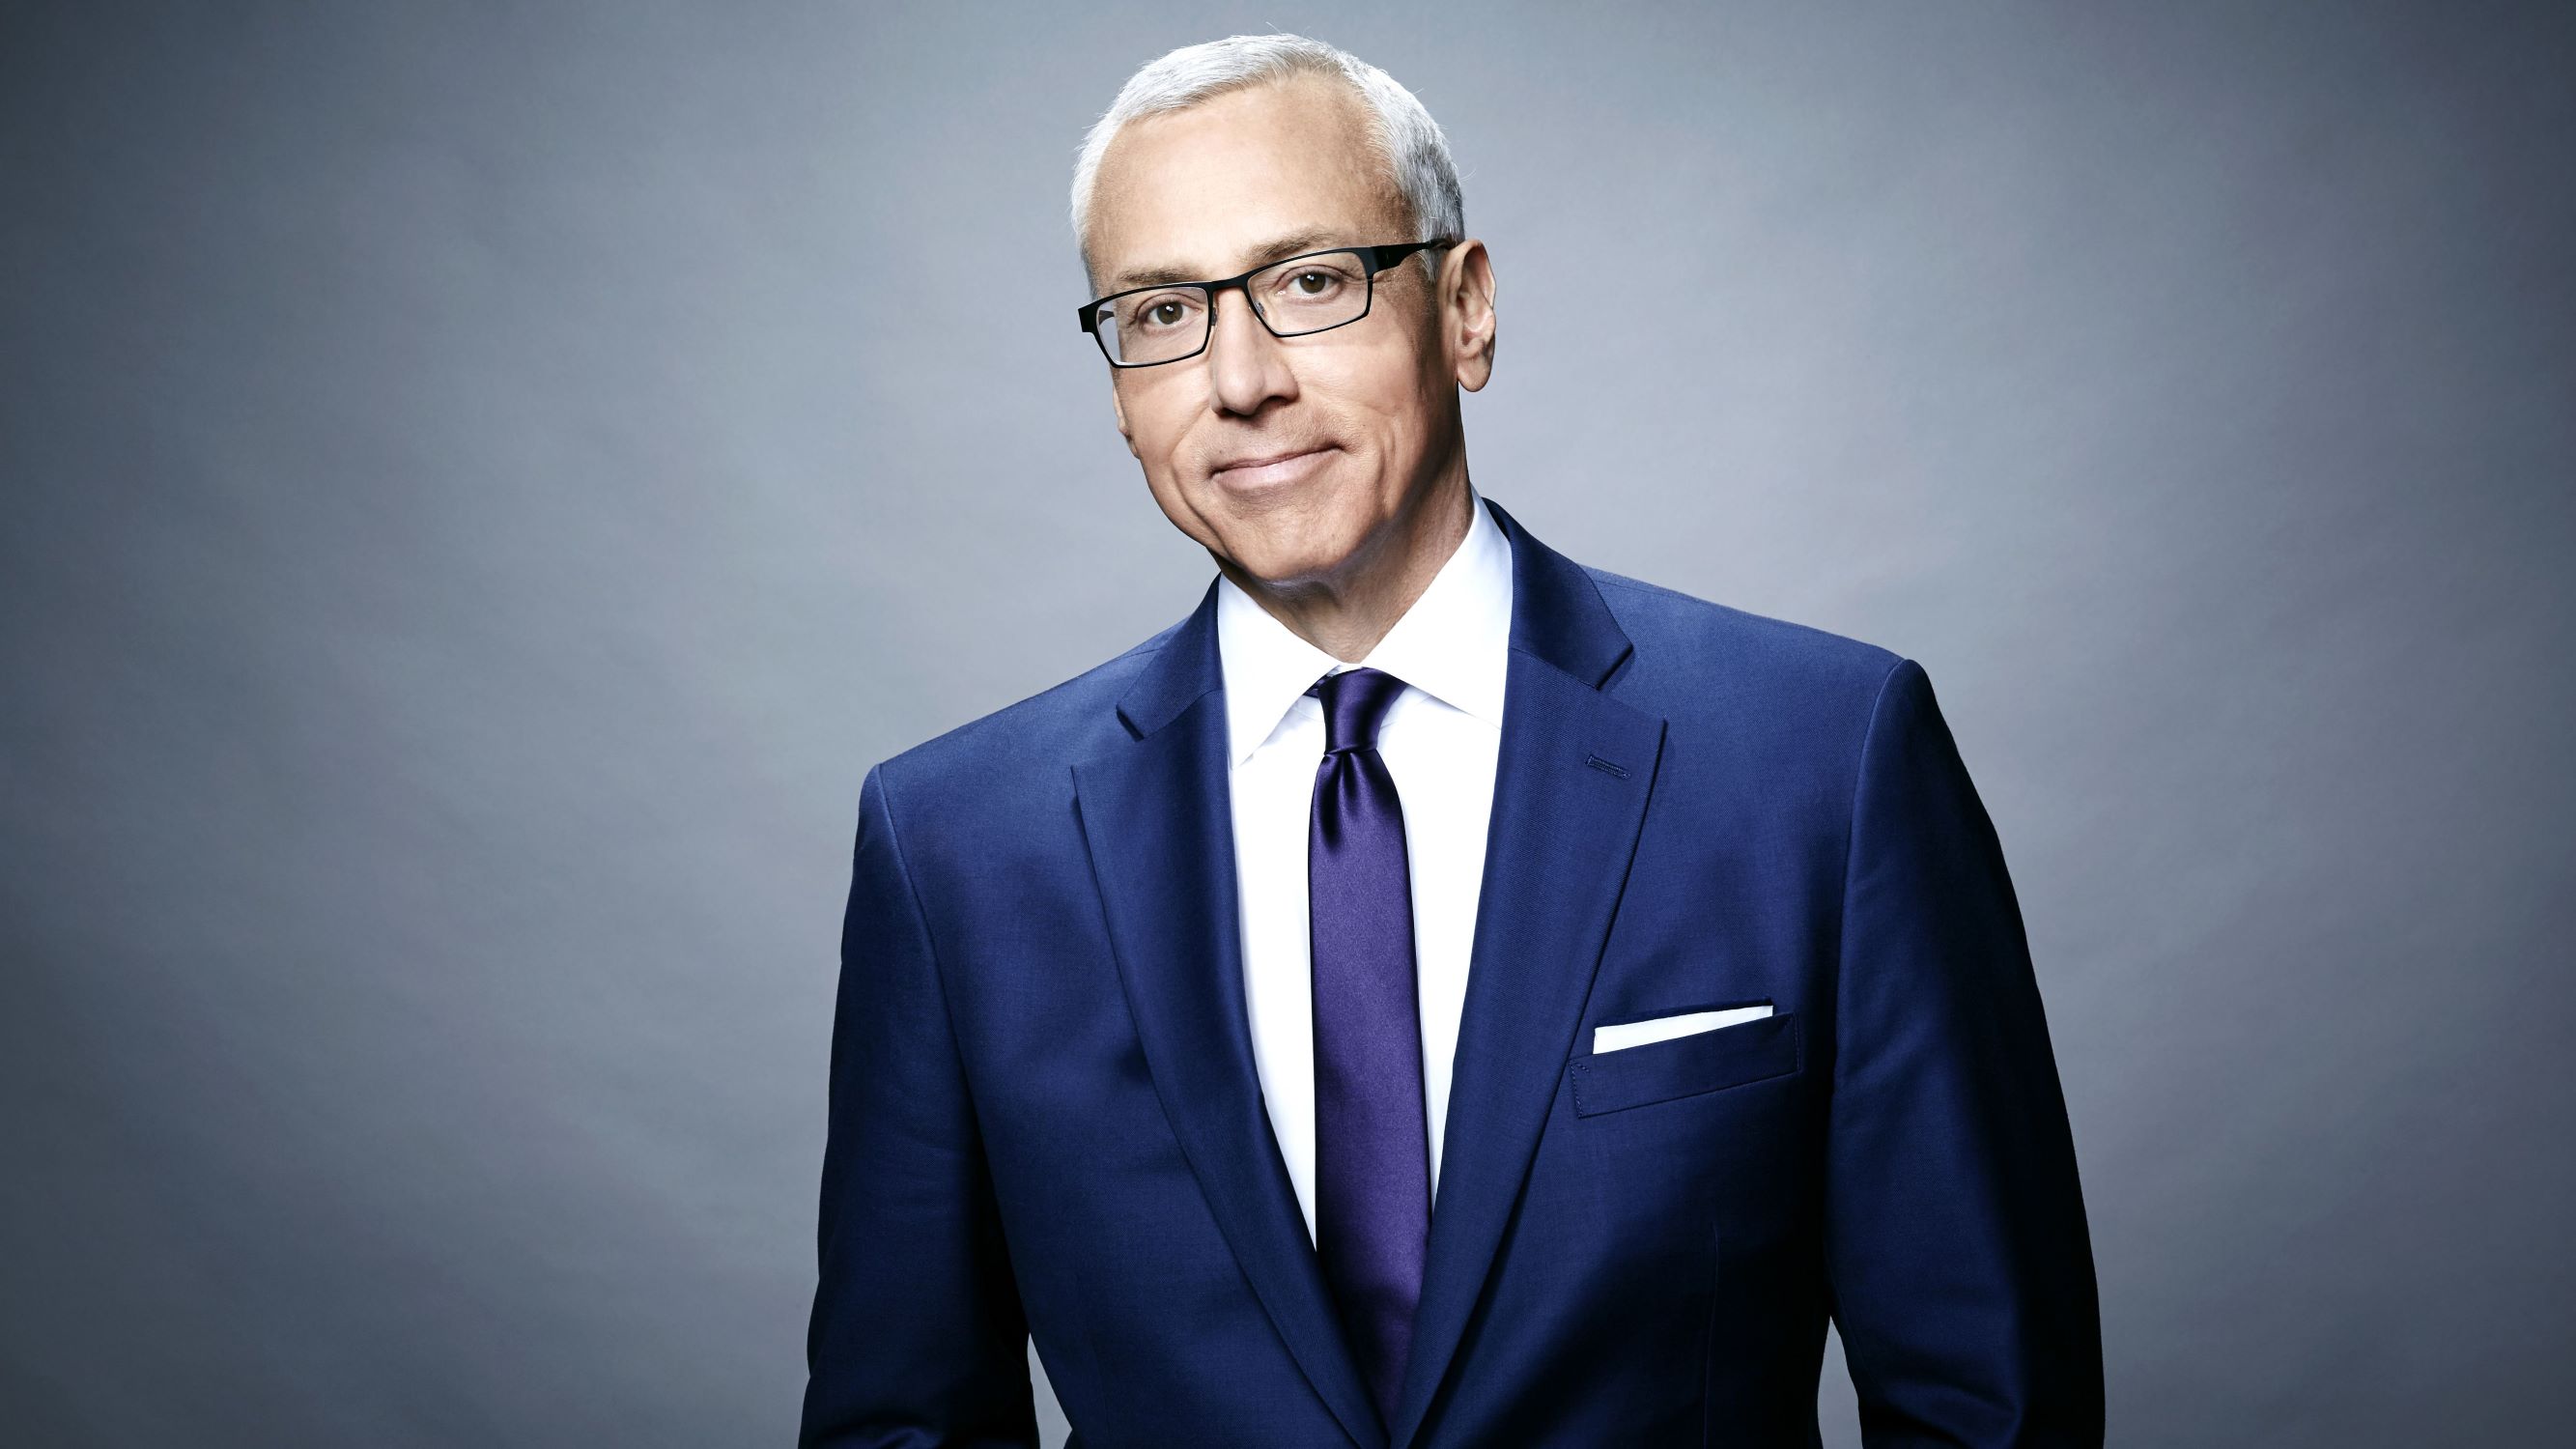 17-intriguing-facts-about-dr-drew-pinsky